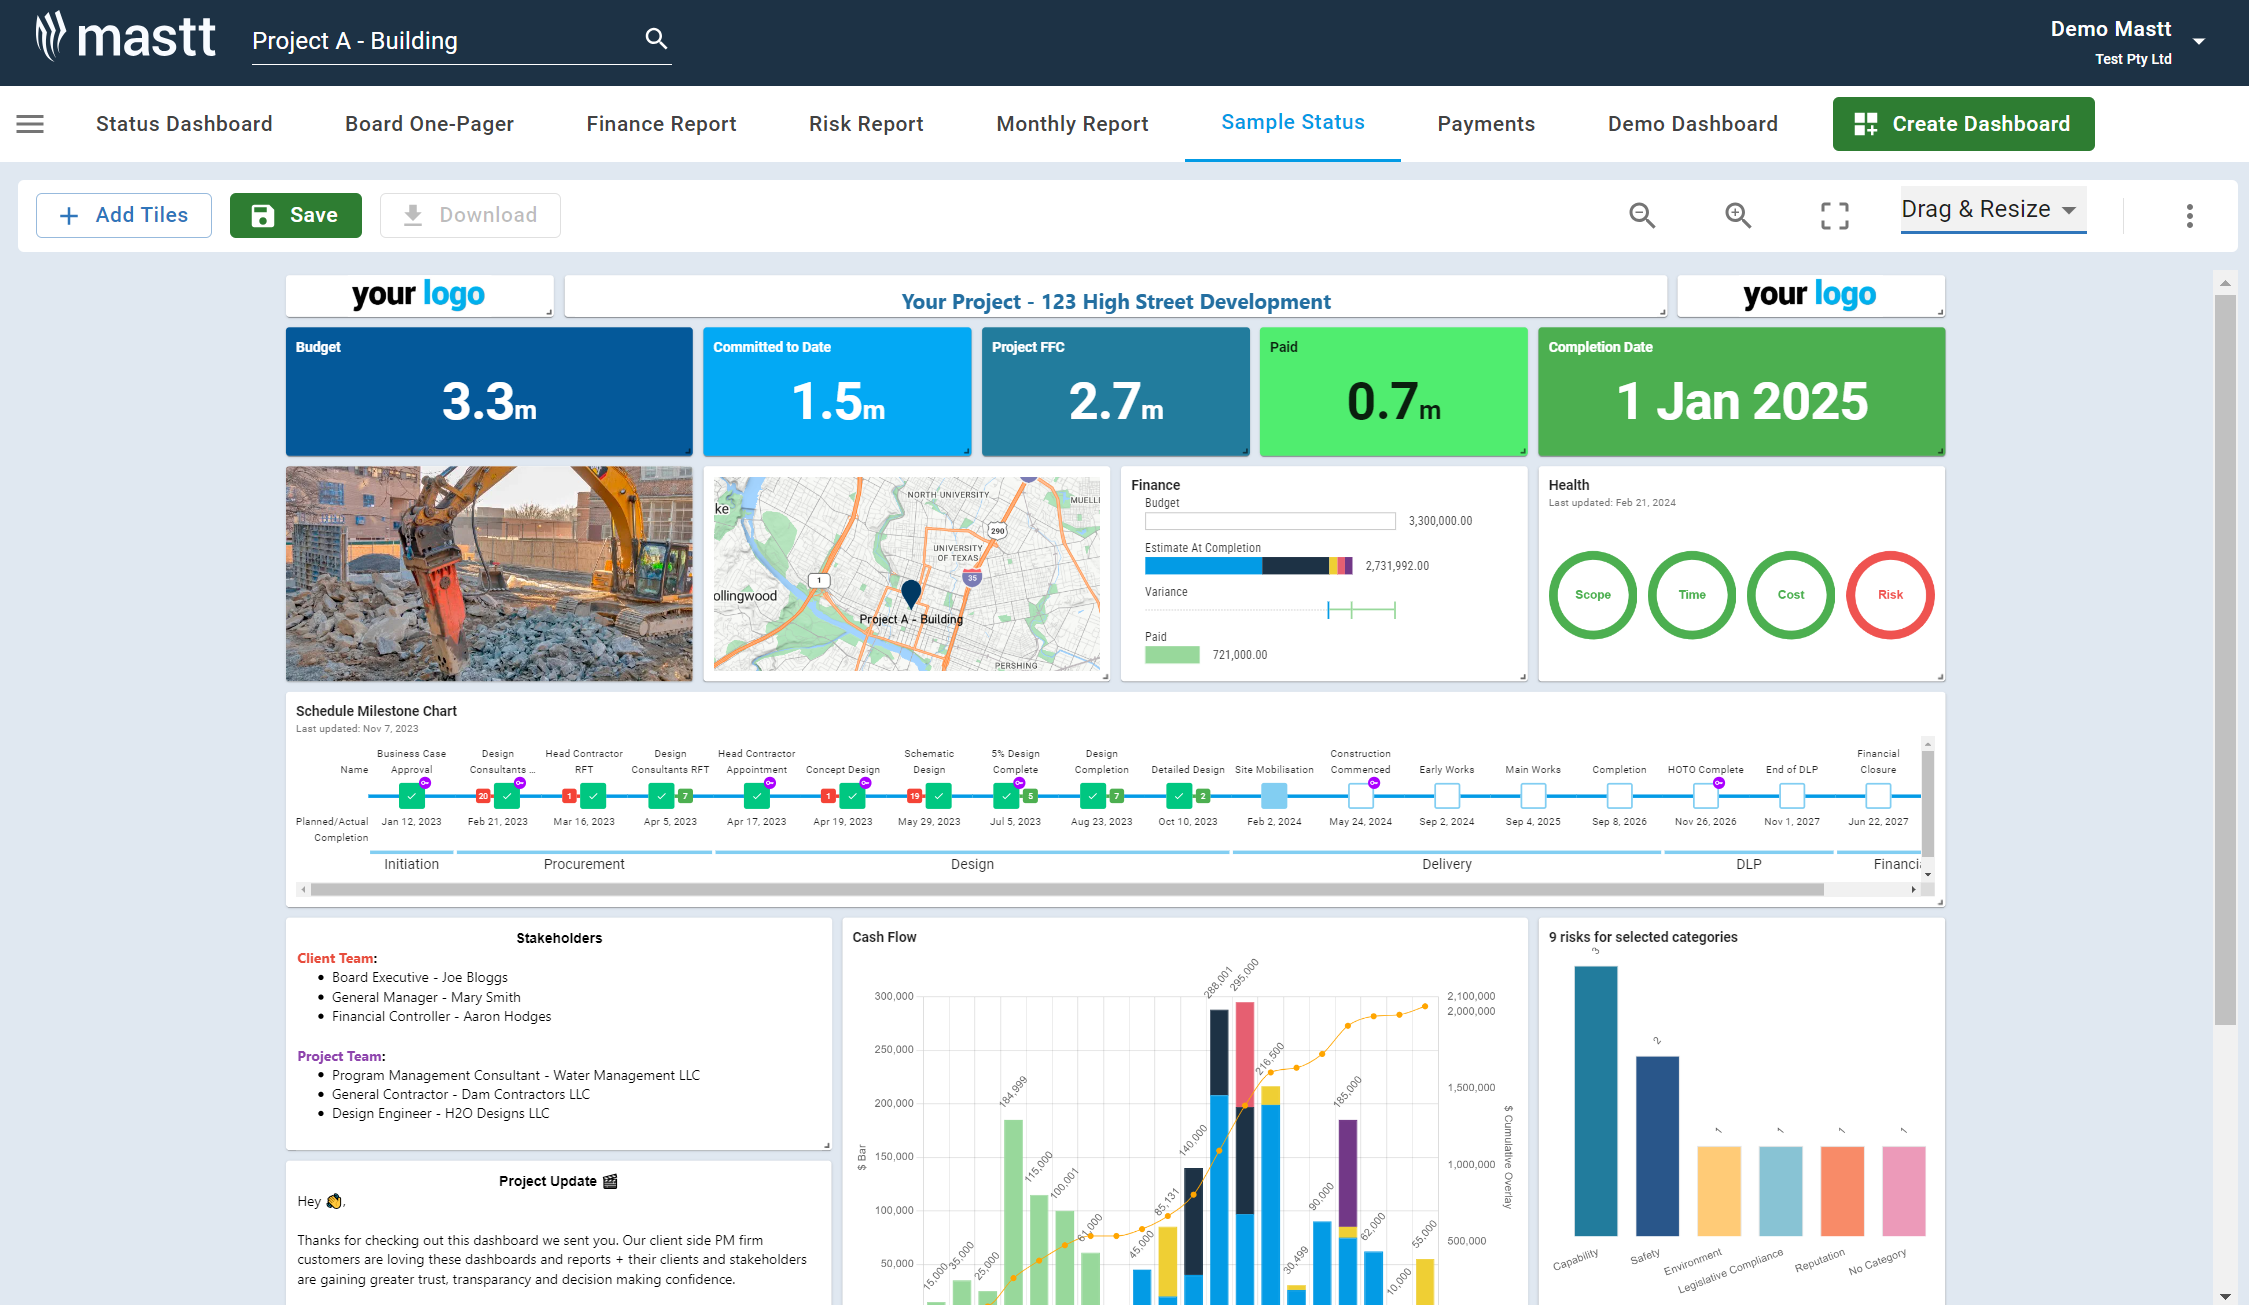 Automated, Configurable Reports & Dashboards - Create high quality visualized reports, dashboards & more instantly from best practice Capital Project report templates. Trust that all project reporting & compliance data is centralised and standardised.